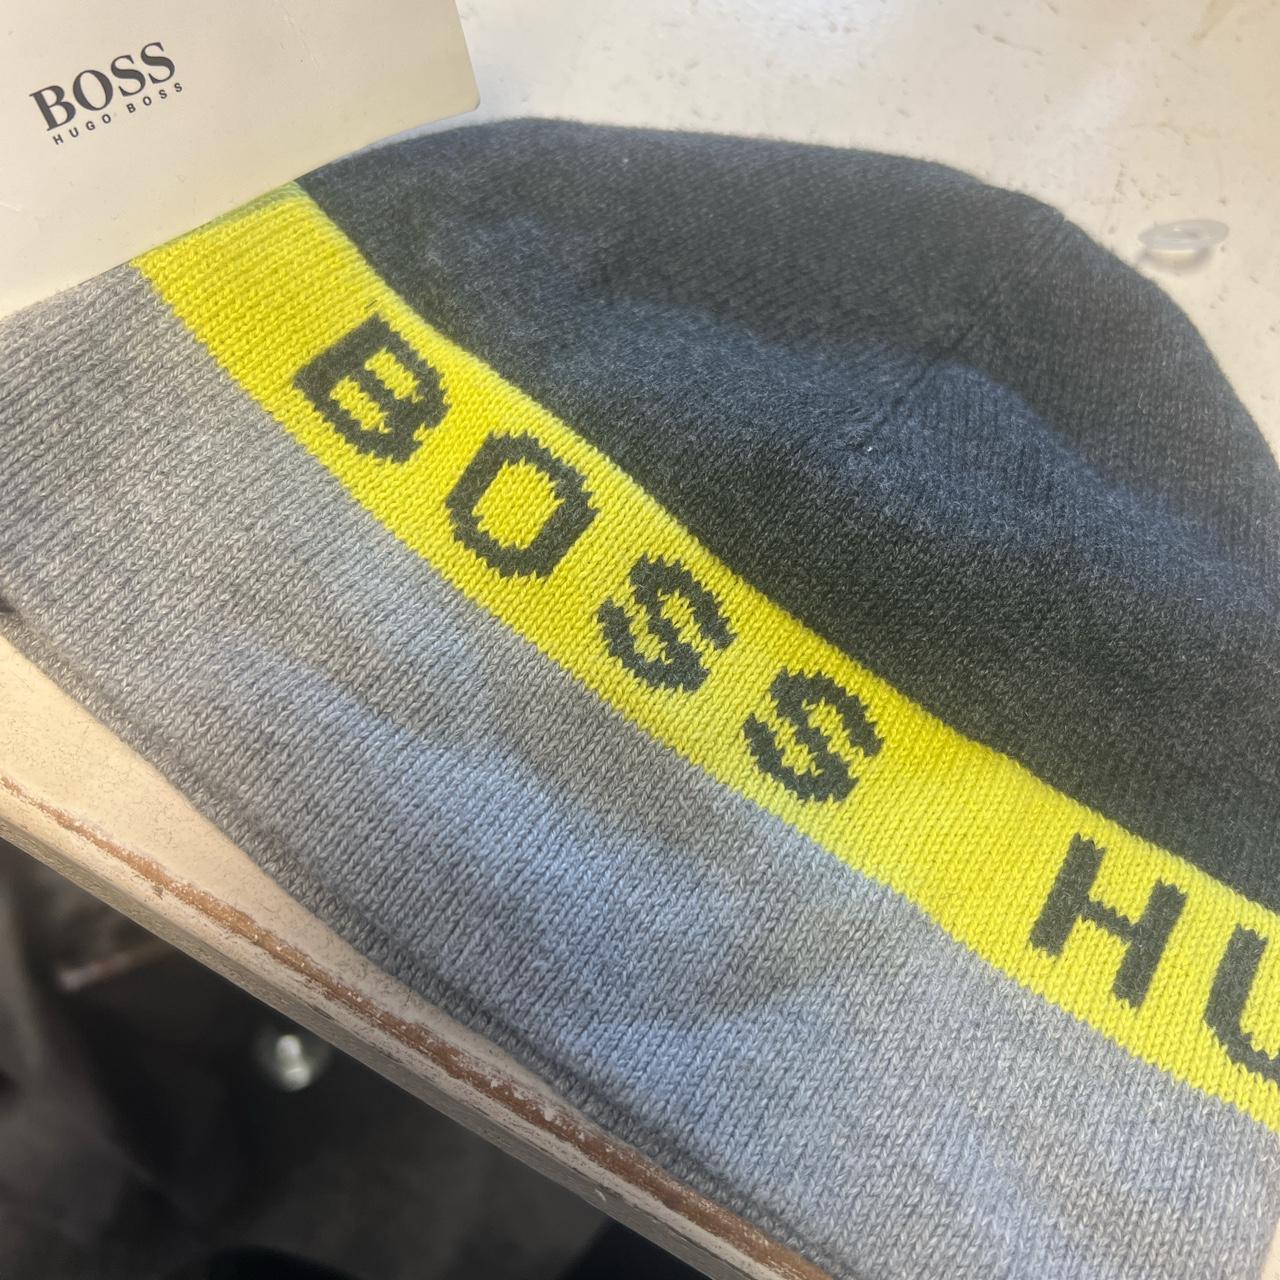 Kid’s HUGO BOSS beanie hat. Brand new with tags. No... - Depop